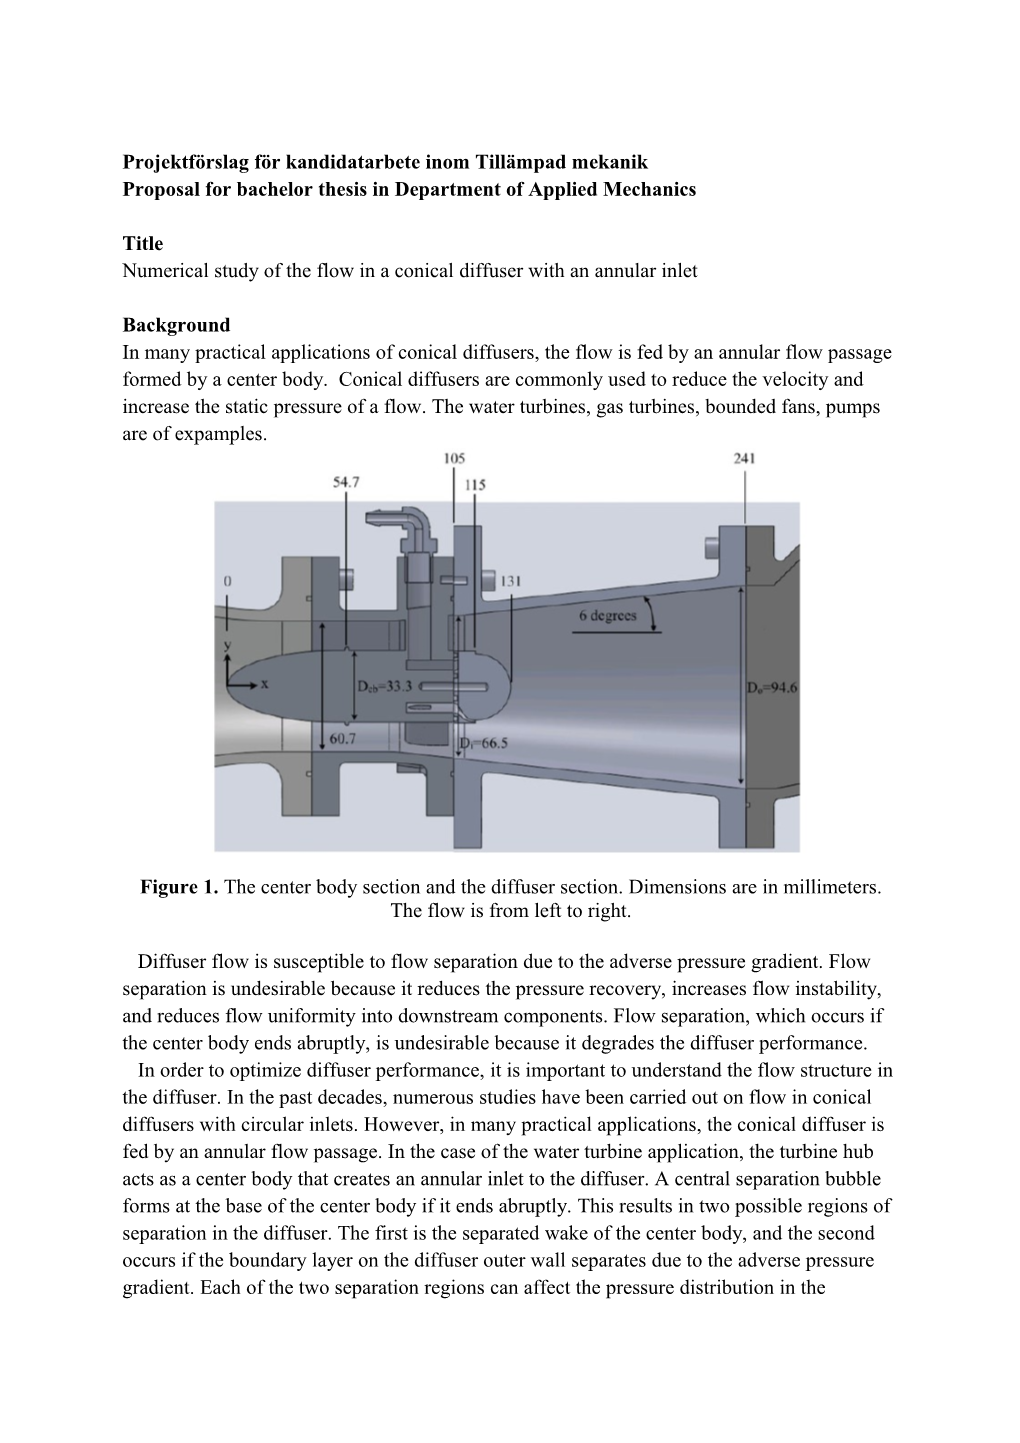 Proposal for Bachelor Thesis in Department of Applied Mechanics